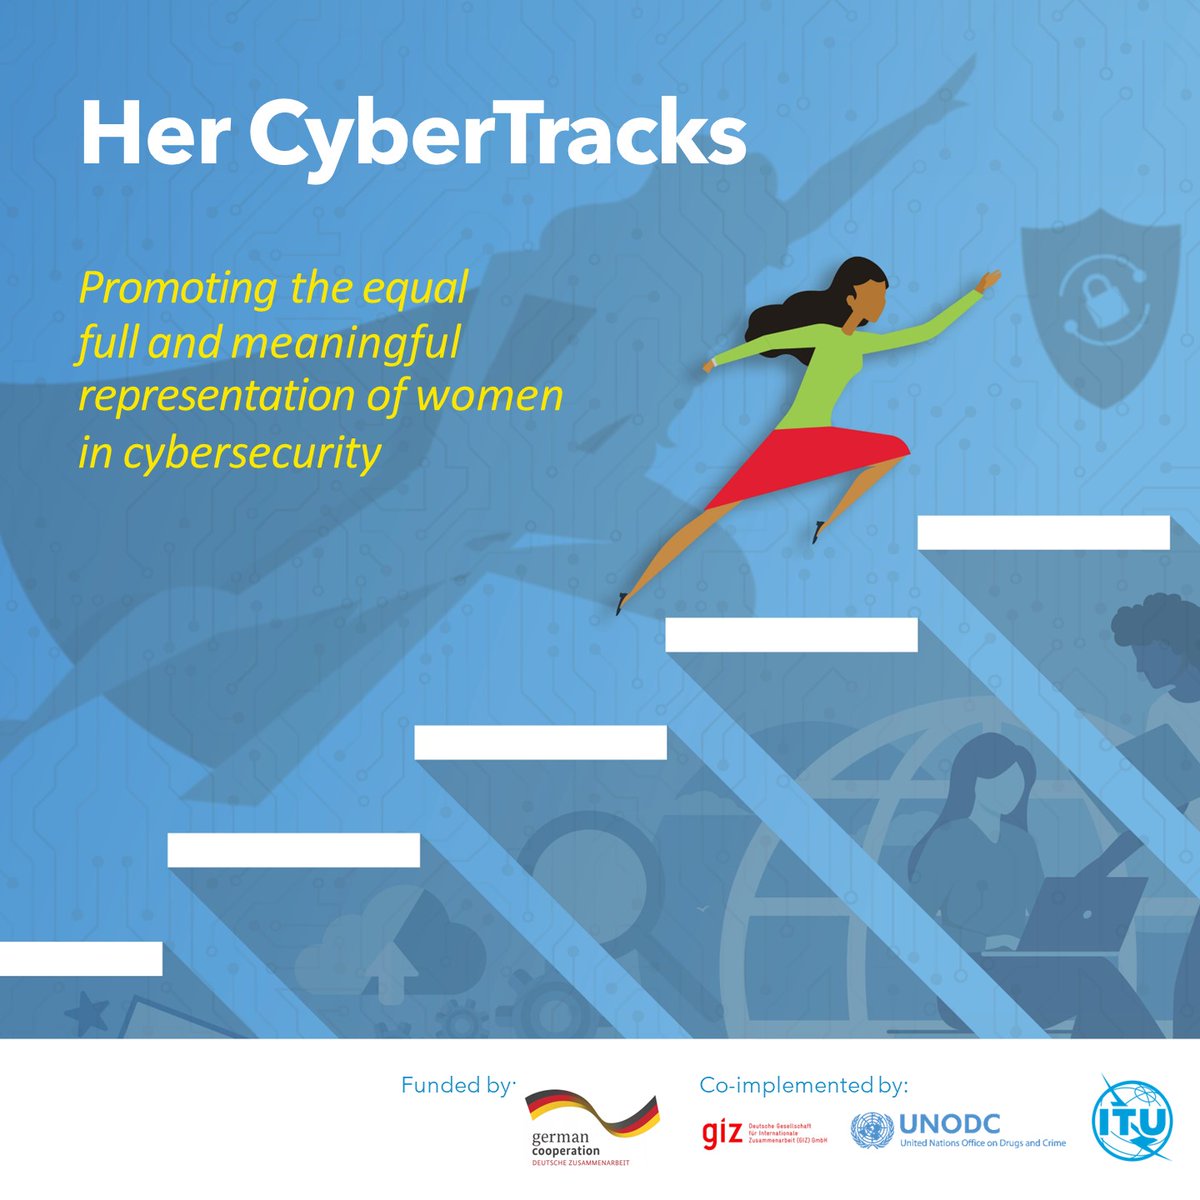 As a fellow of #hercybertracks 2023, I highly recommend this program organized by @ITU  @giz_gmbh @UNODC  for women in cybersecurity and IT, especially at the entry level.

Give it your best shot!!!

itu.int/en/ITU-D/Cyber…